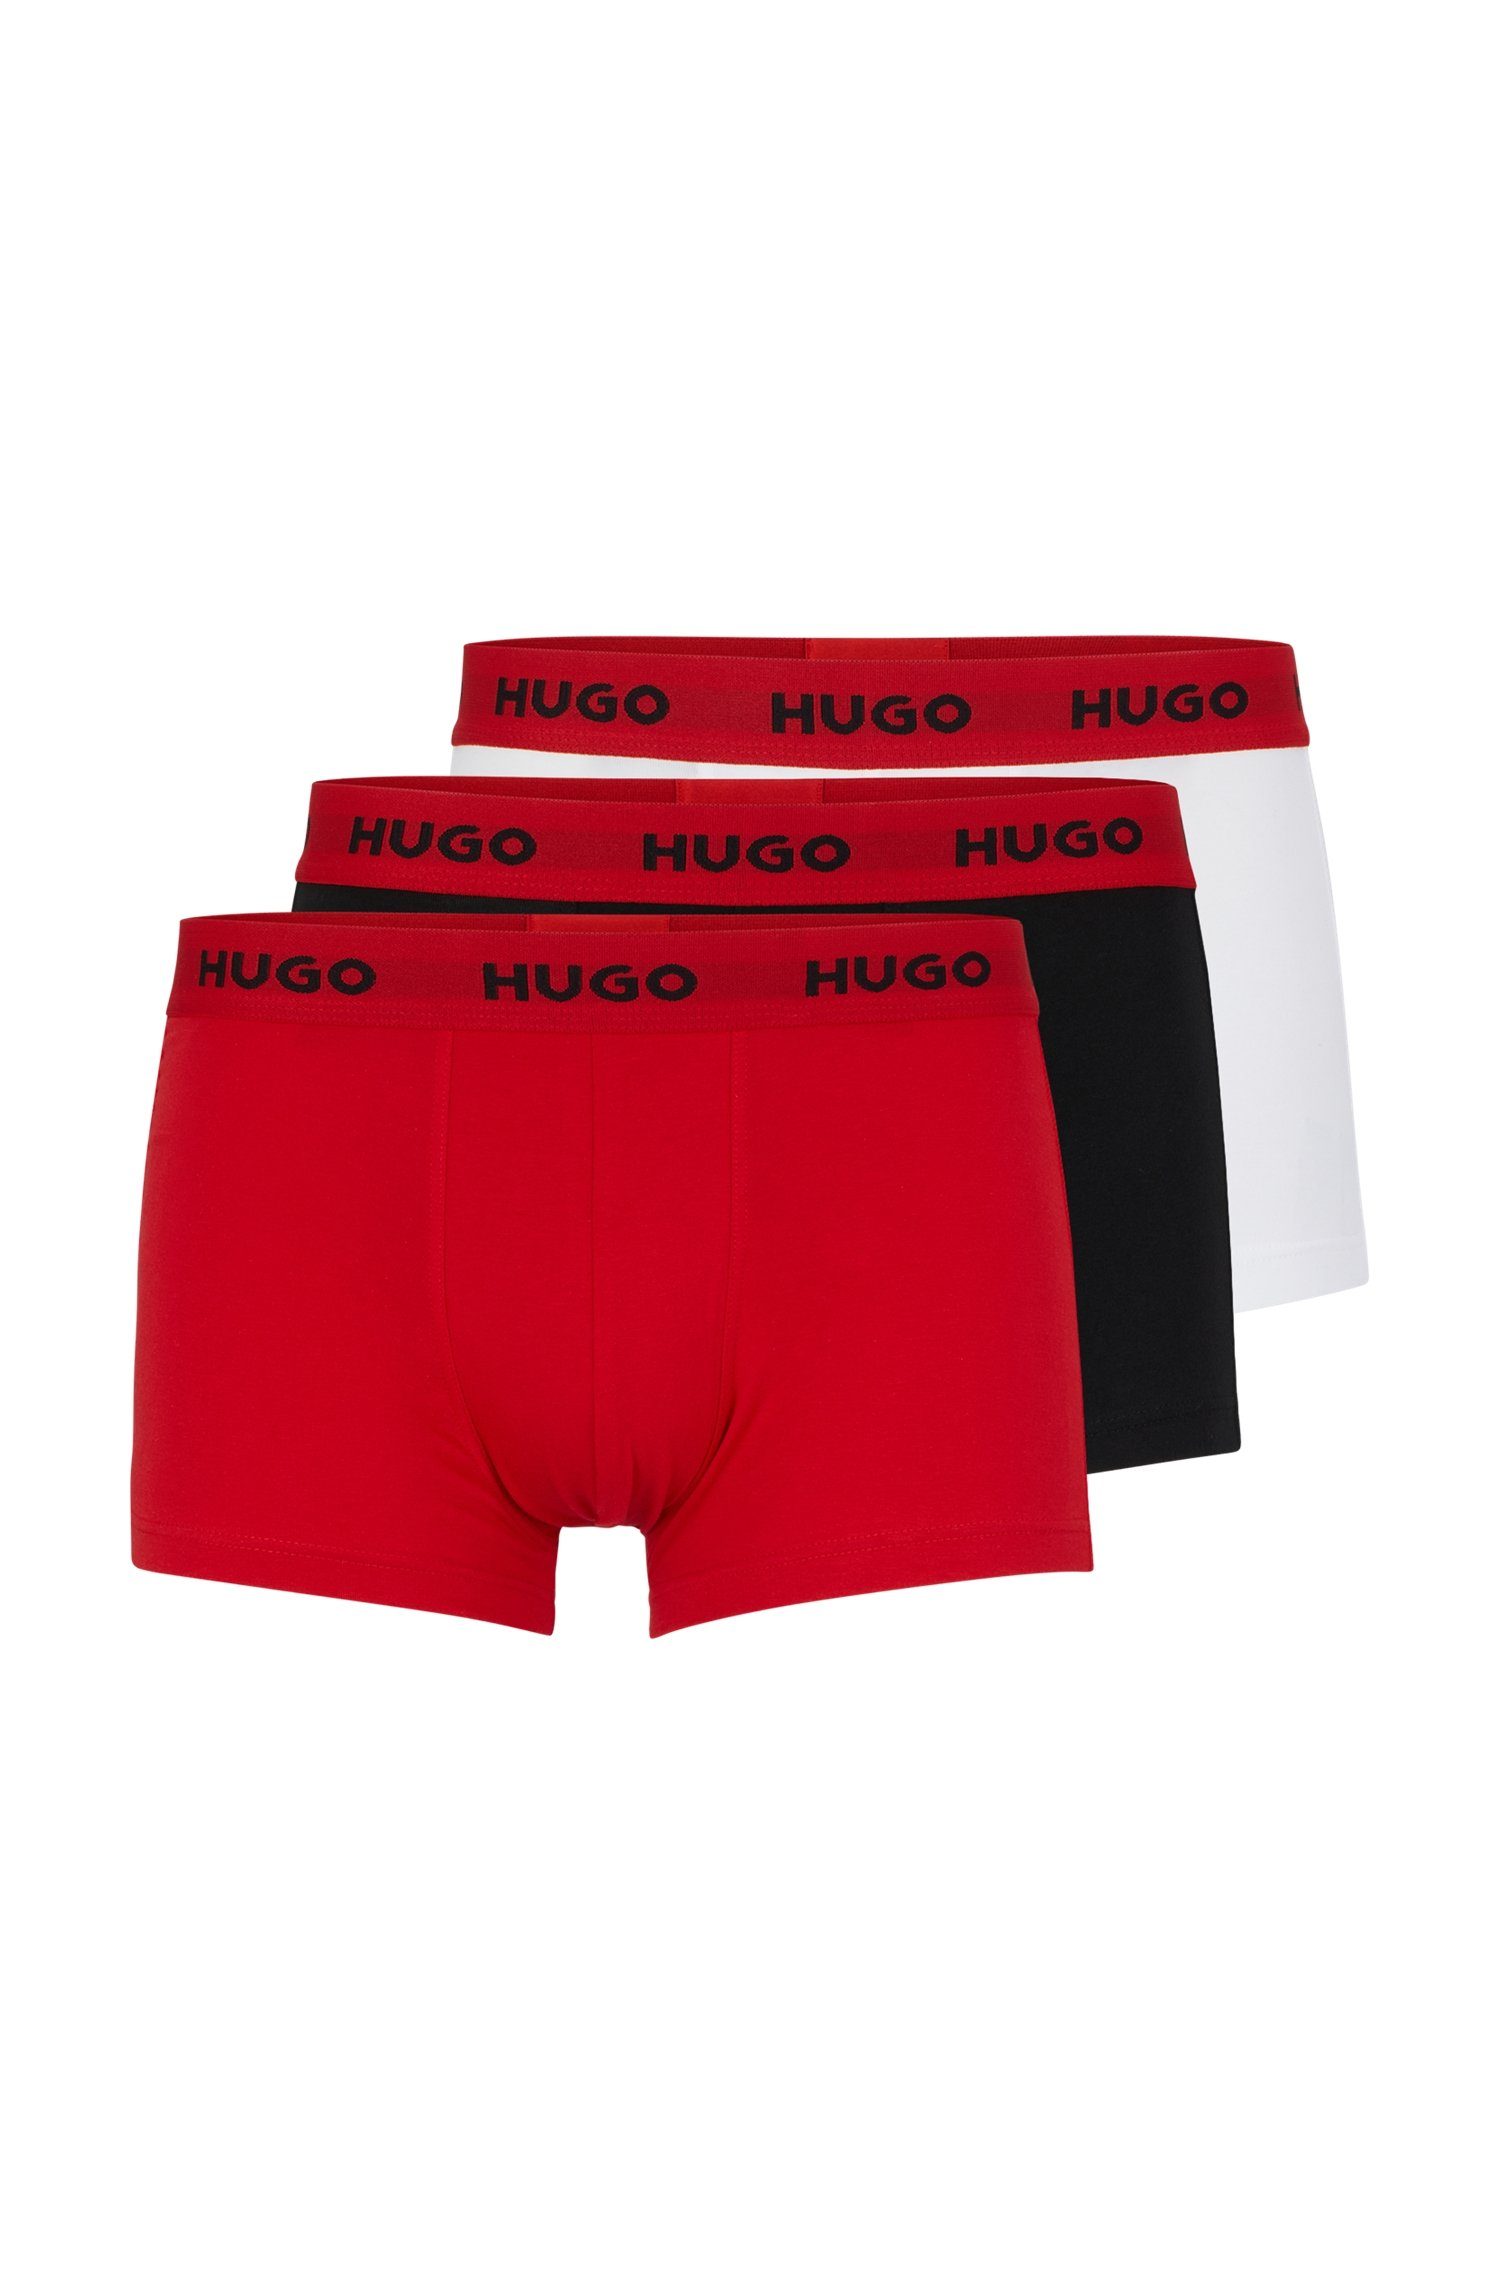 HUGO TRUNK TRIPLET 972 3er Trunk Open PACK Miscellaneous (Packung, Pack)